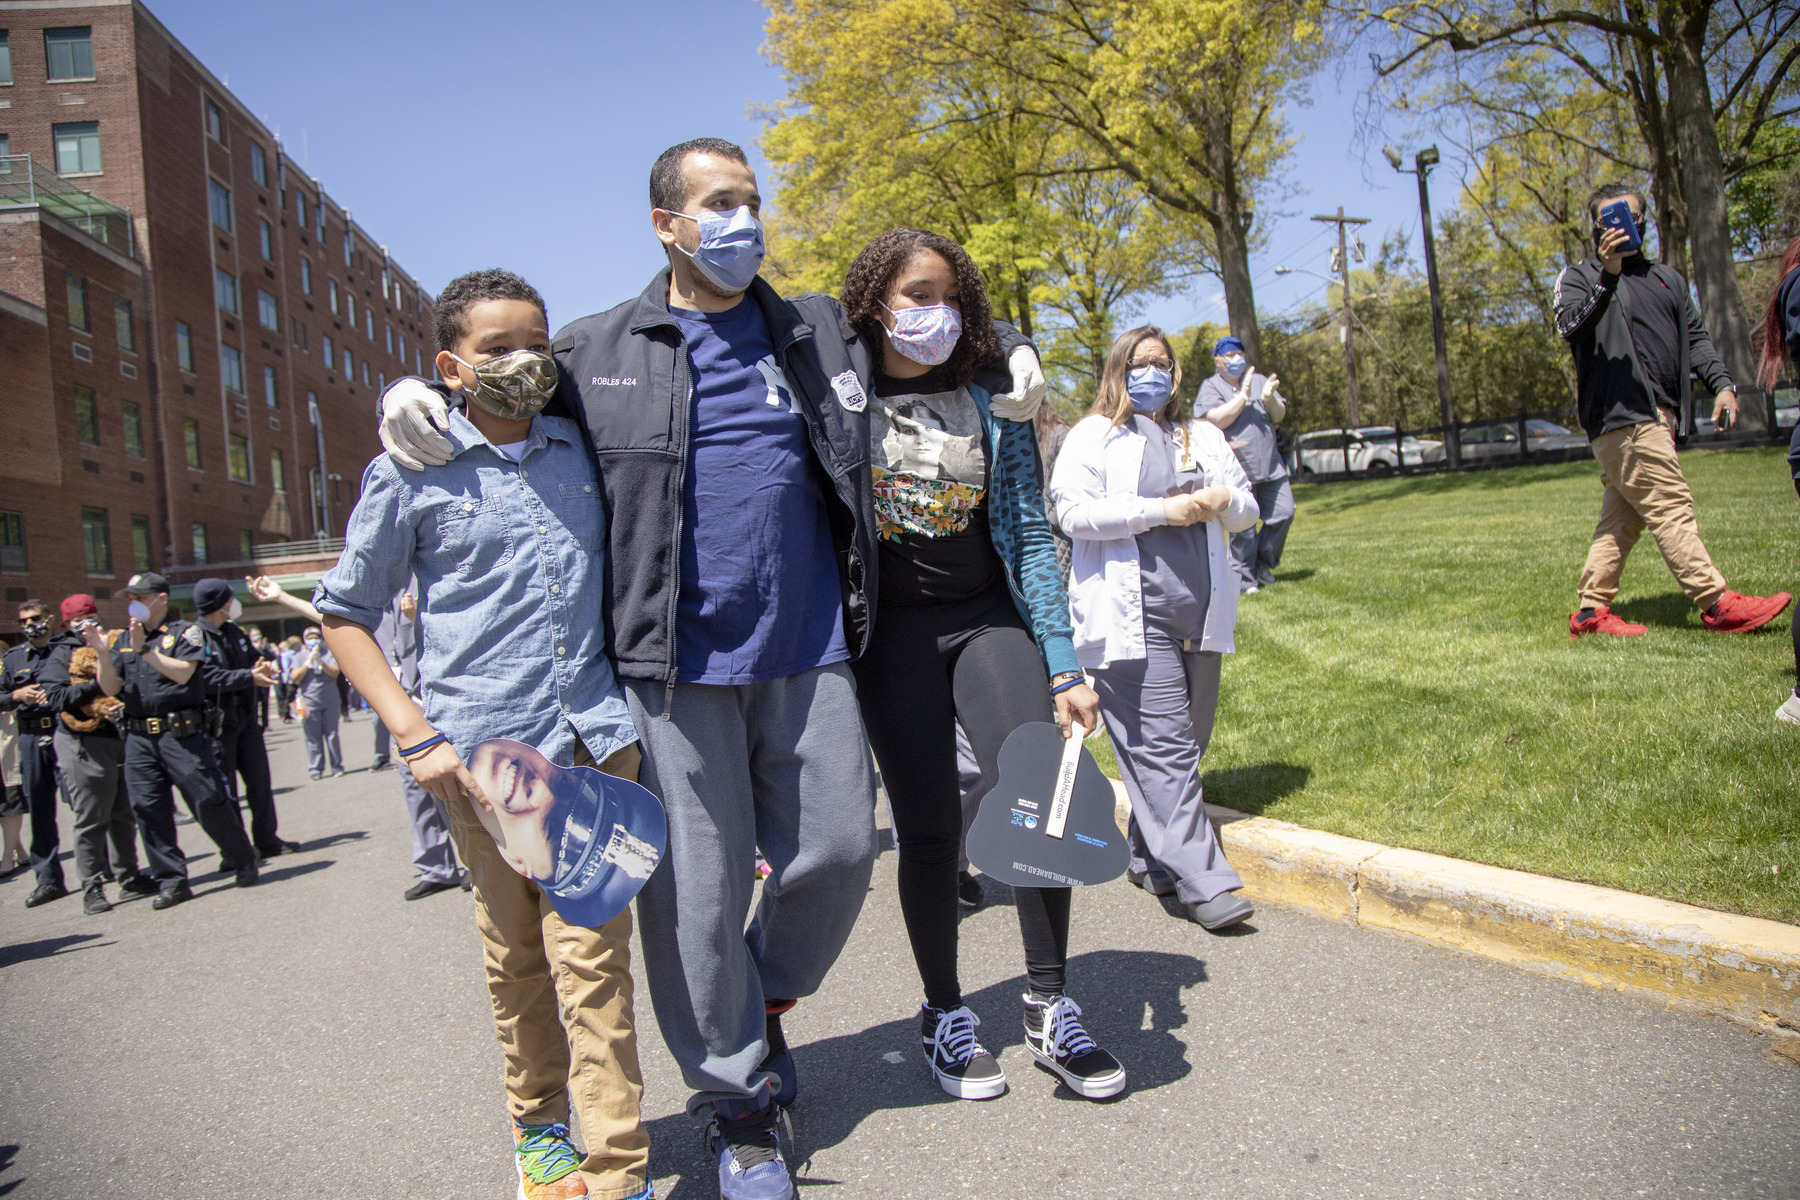 A patient leaving the hospital for COVID-19 is escorted by his family and staff at Holy Name Medical Center during a clap out. 5/12/2020 Photo by Jeff Rhode